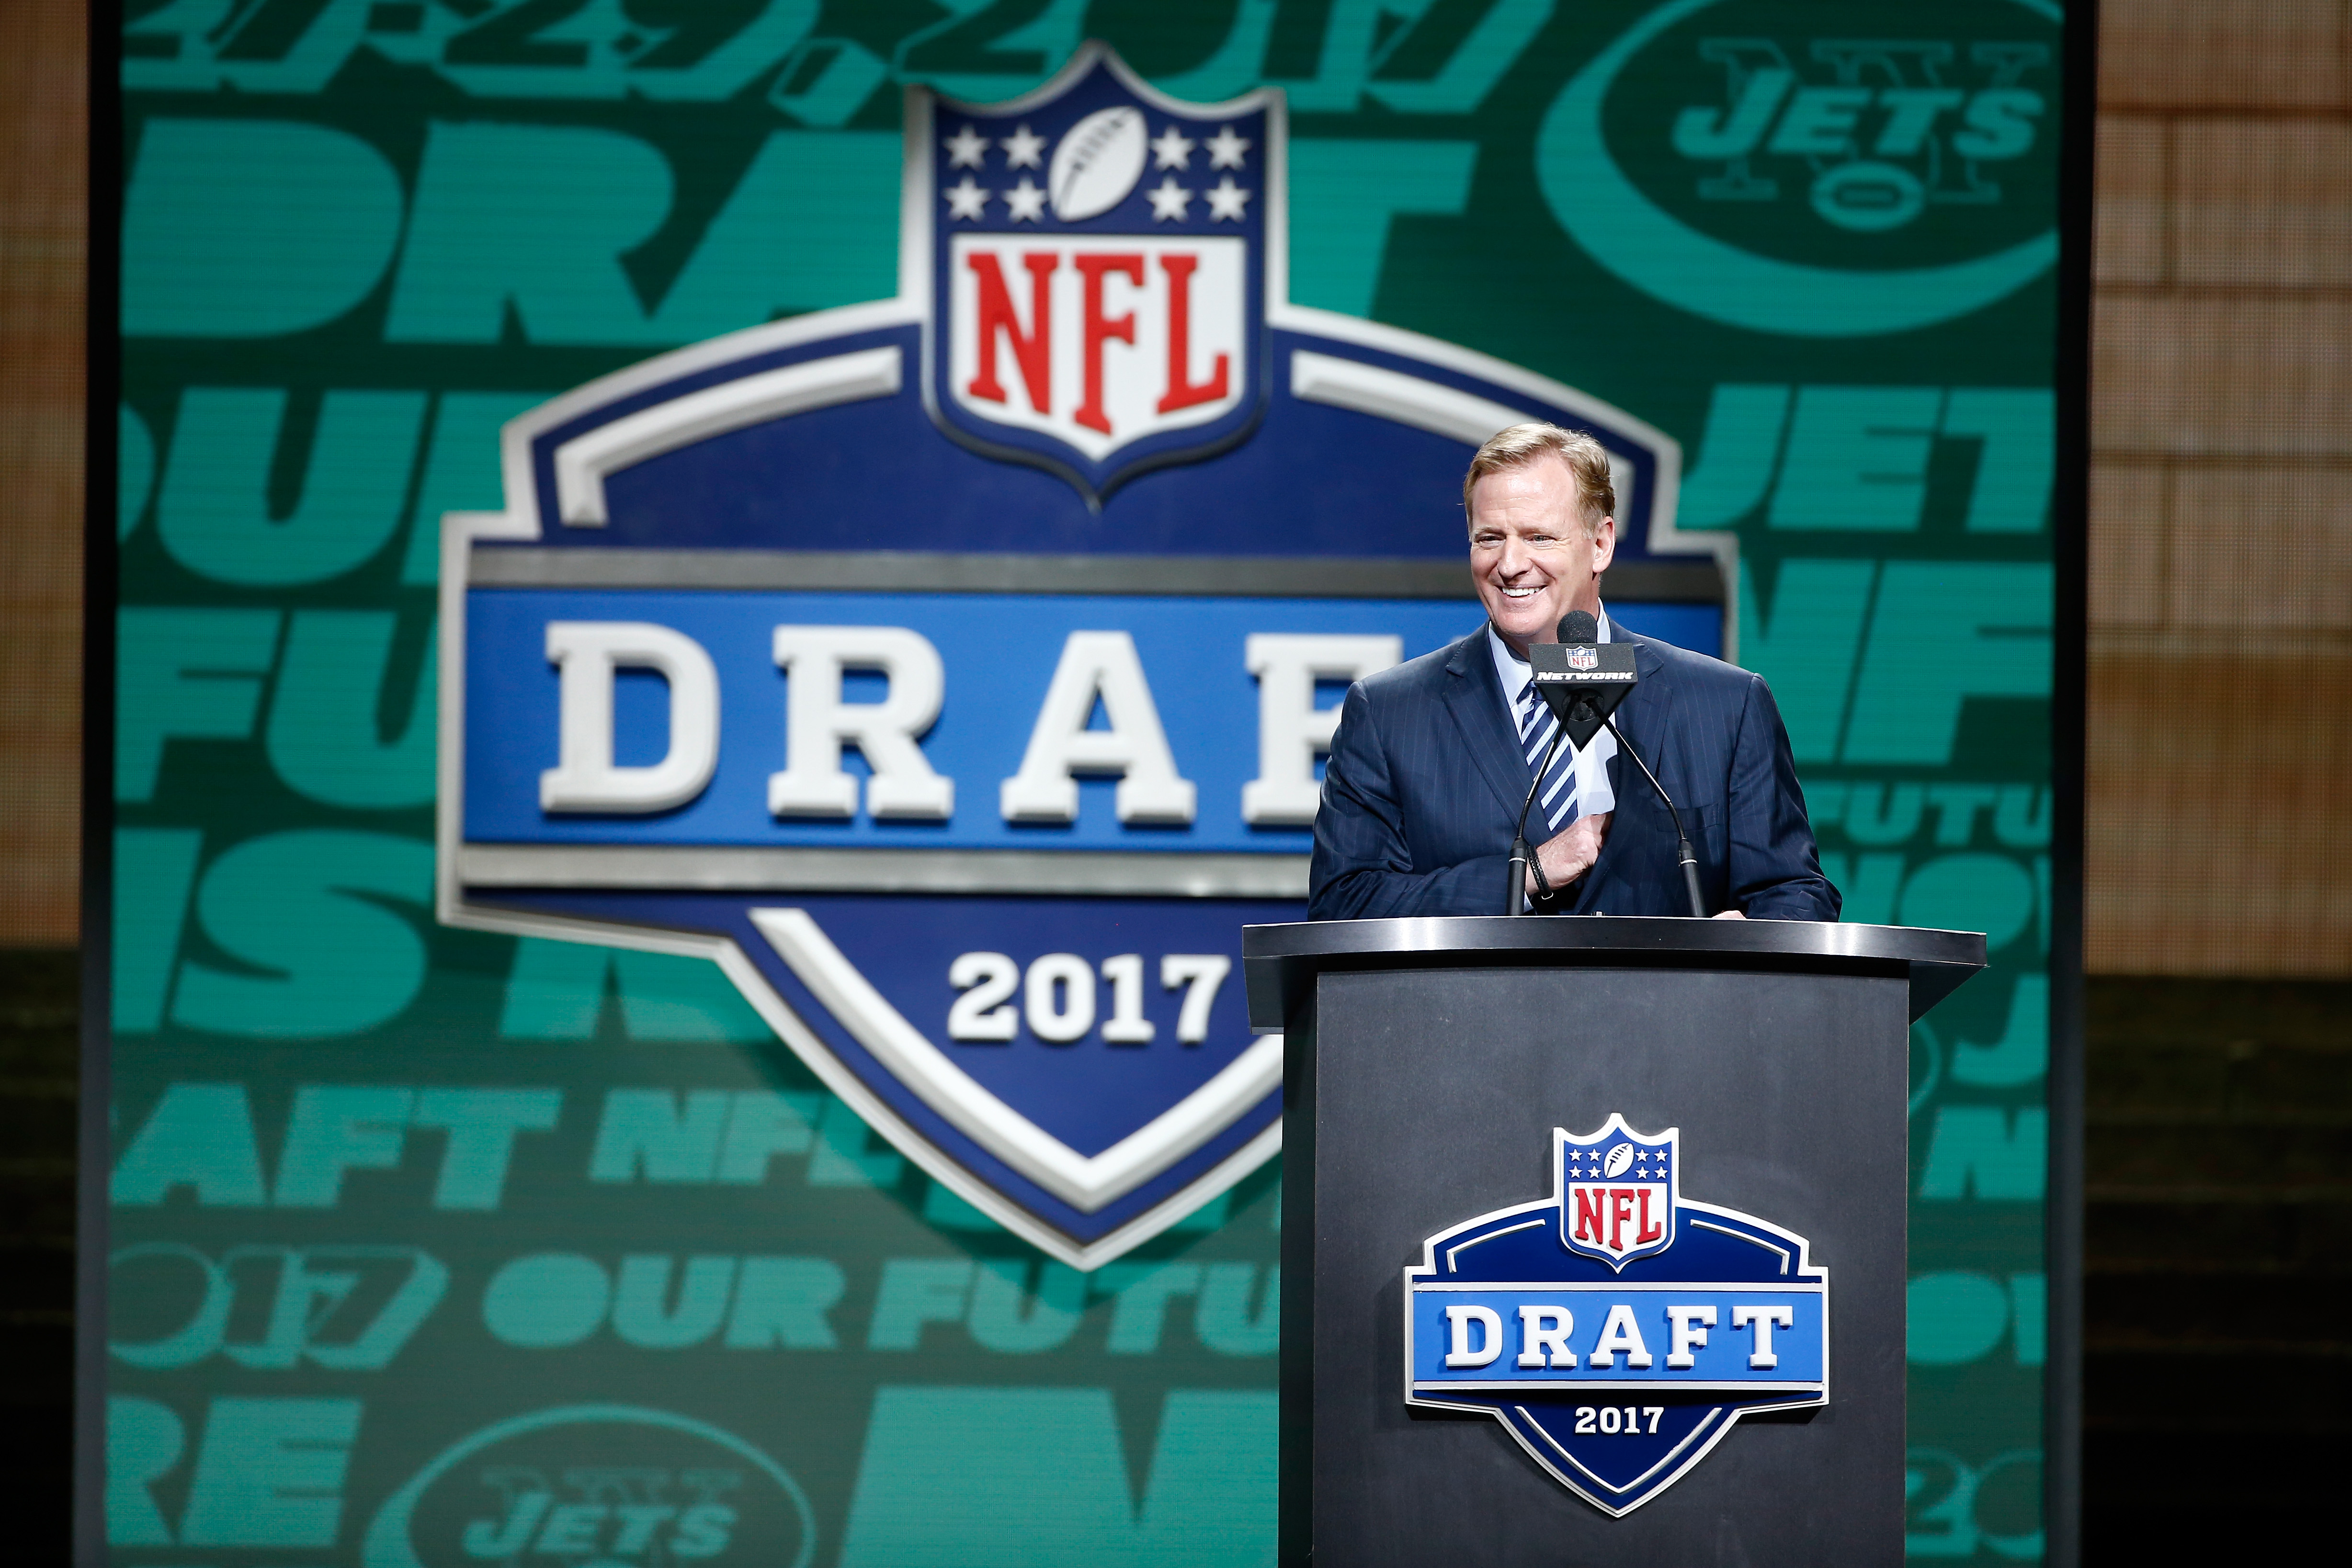 PHILADELPHIA, PA - APRIL 27: Commissioner of the National Football League Roger Goodell speaks during the first round of the 2017 NFL Draft at the Philadelphia Museum of Art on April 27, 2017 in Philadelphia, Pennsylvania.